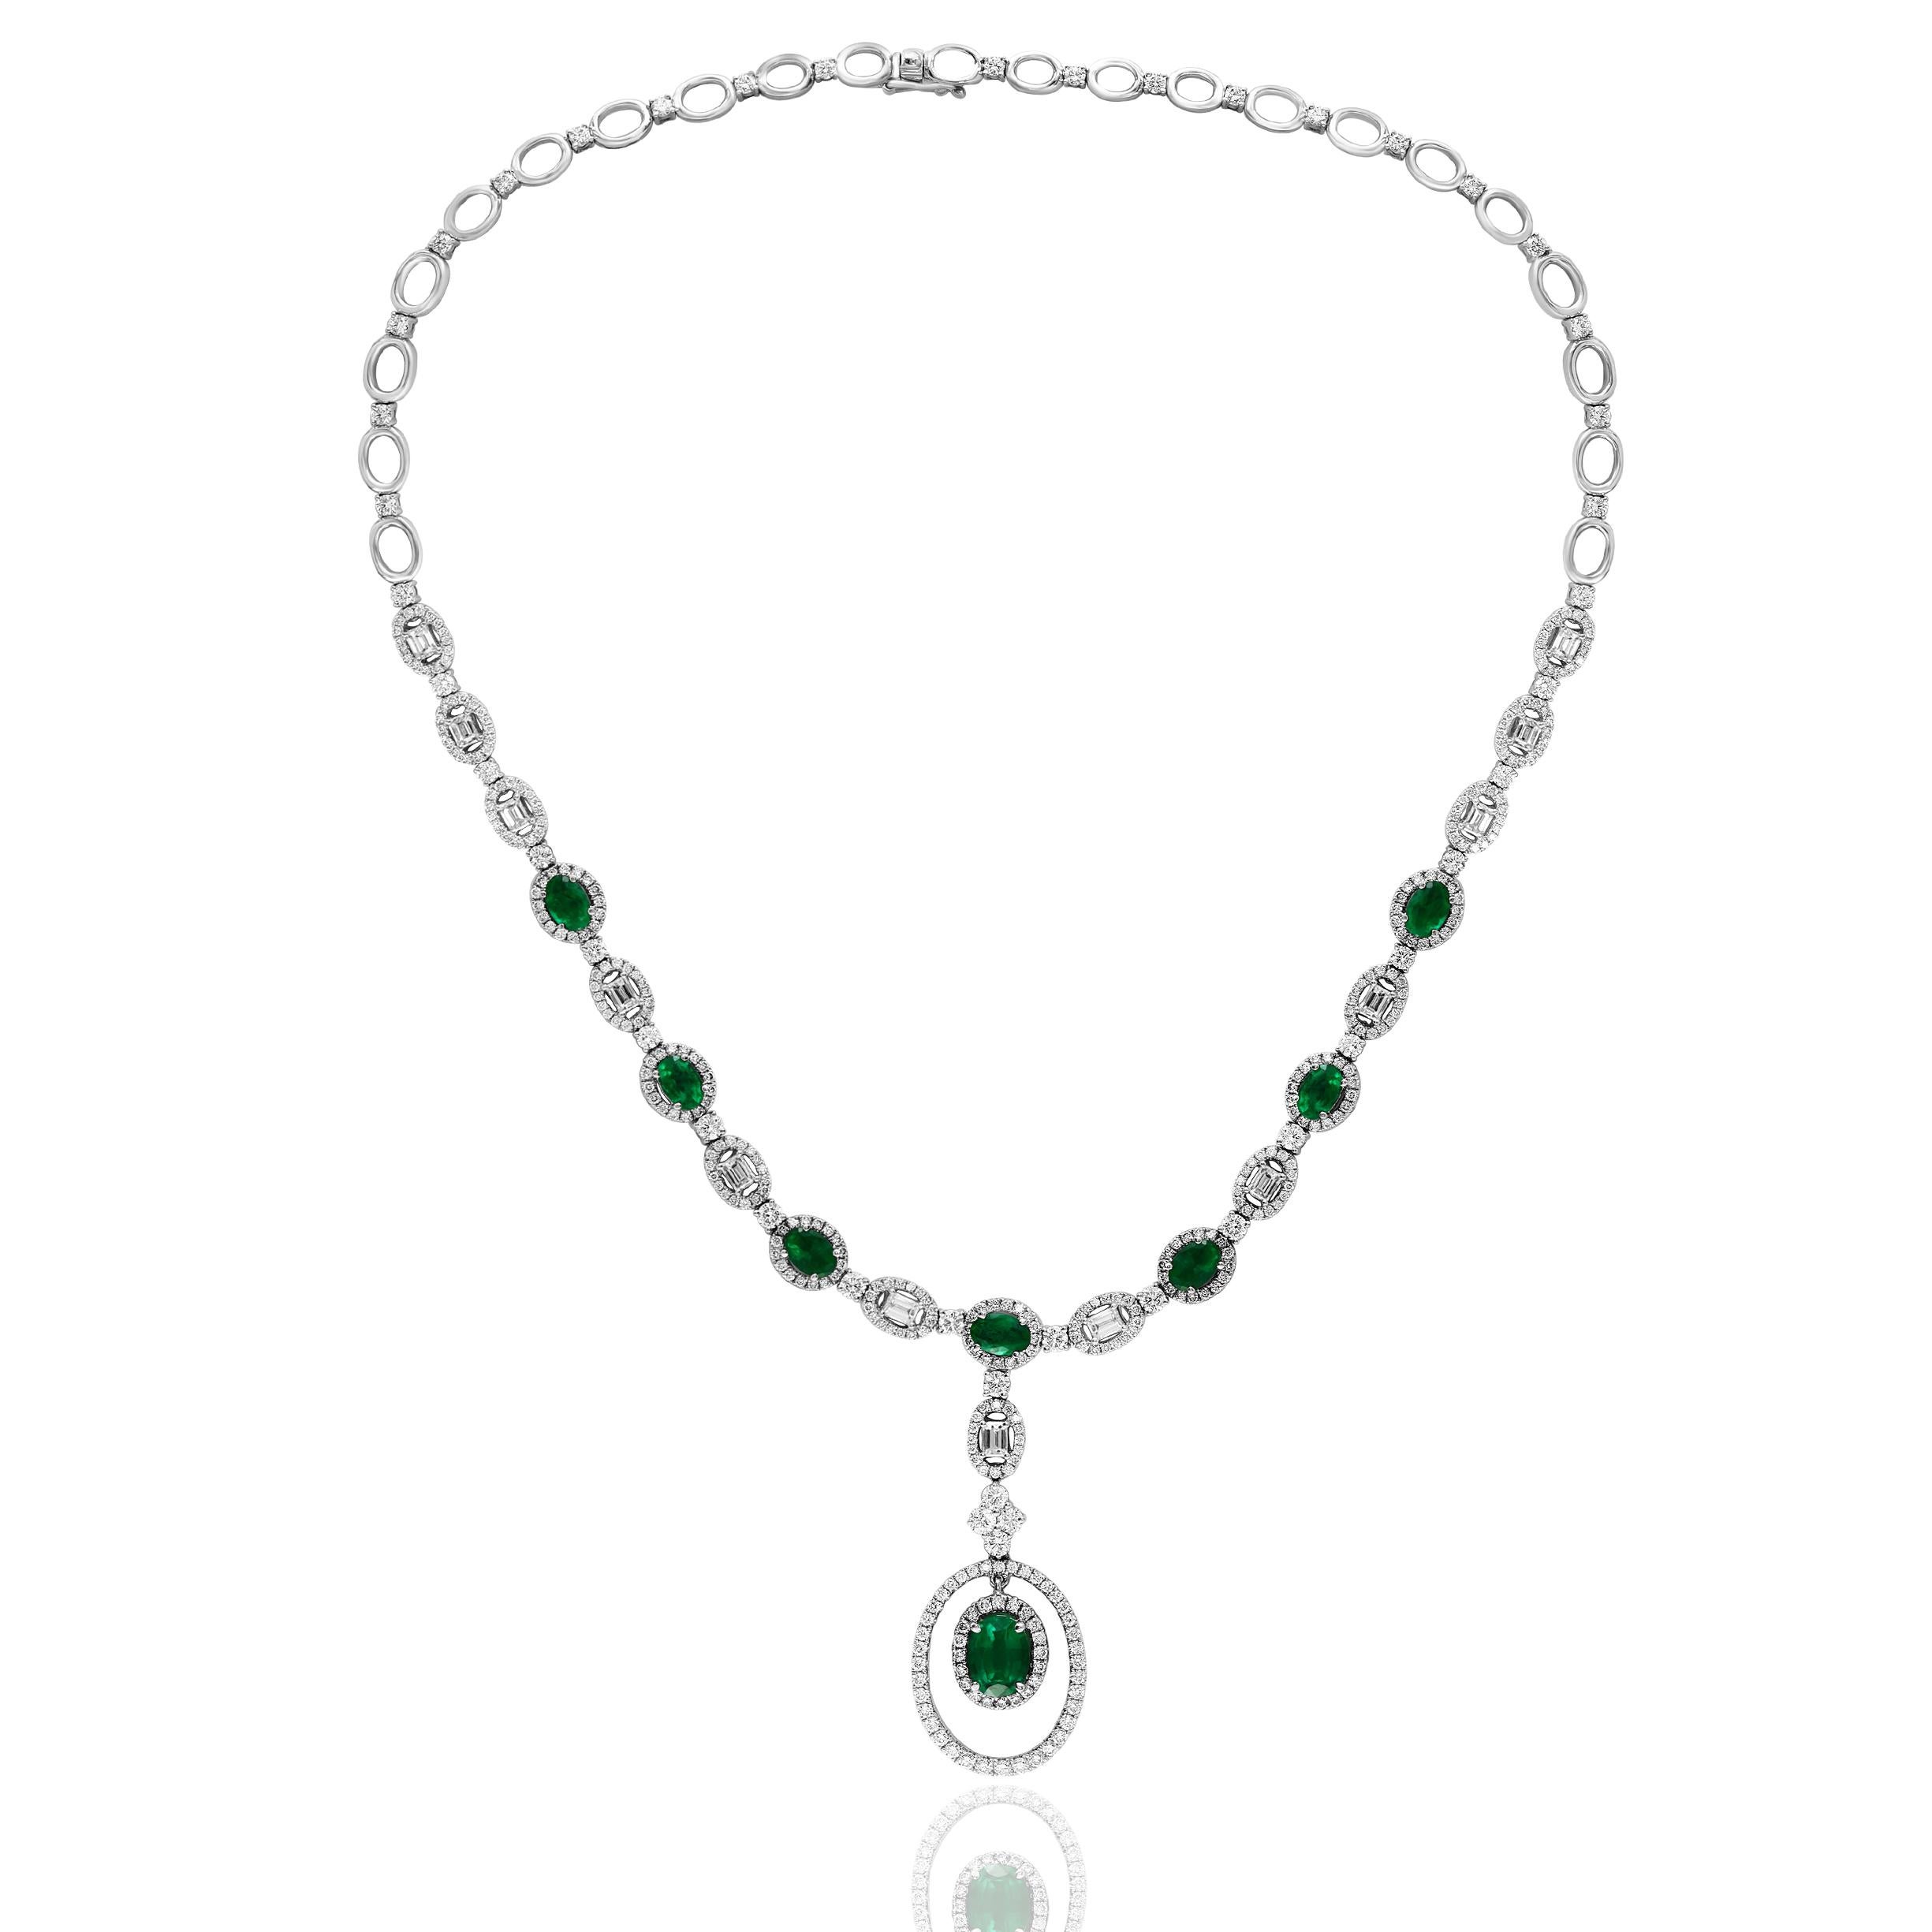 A unique and chic necklace showcasing a drop pendant in an open work design. 8 oval cut emeralds weigh 4.21 carats, and 425 accent diamonds surrounding the emerald weigh approx 5.05 carats. 13 emerald cut diamonds weigh 1.72 carats. Made in 18-karat